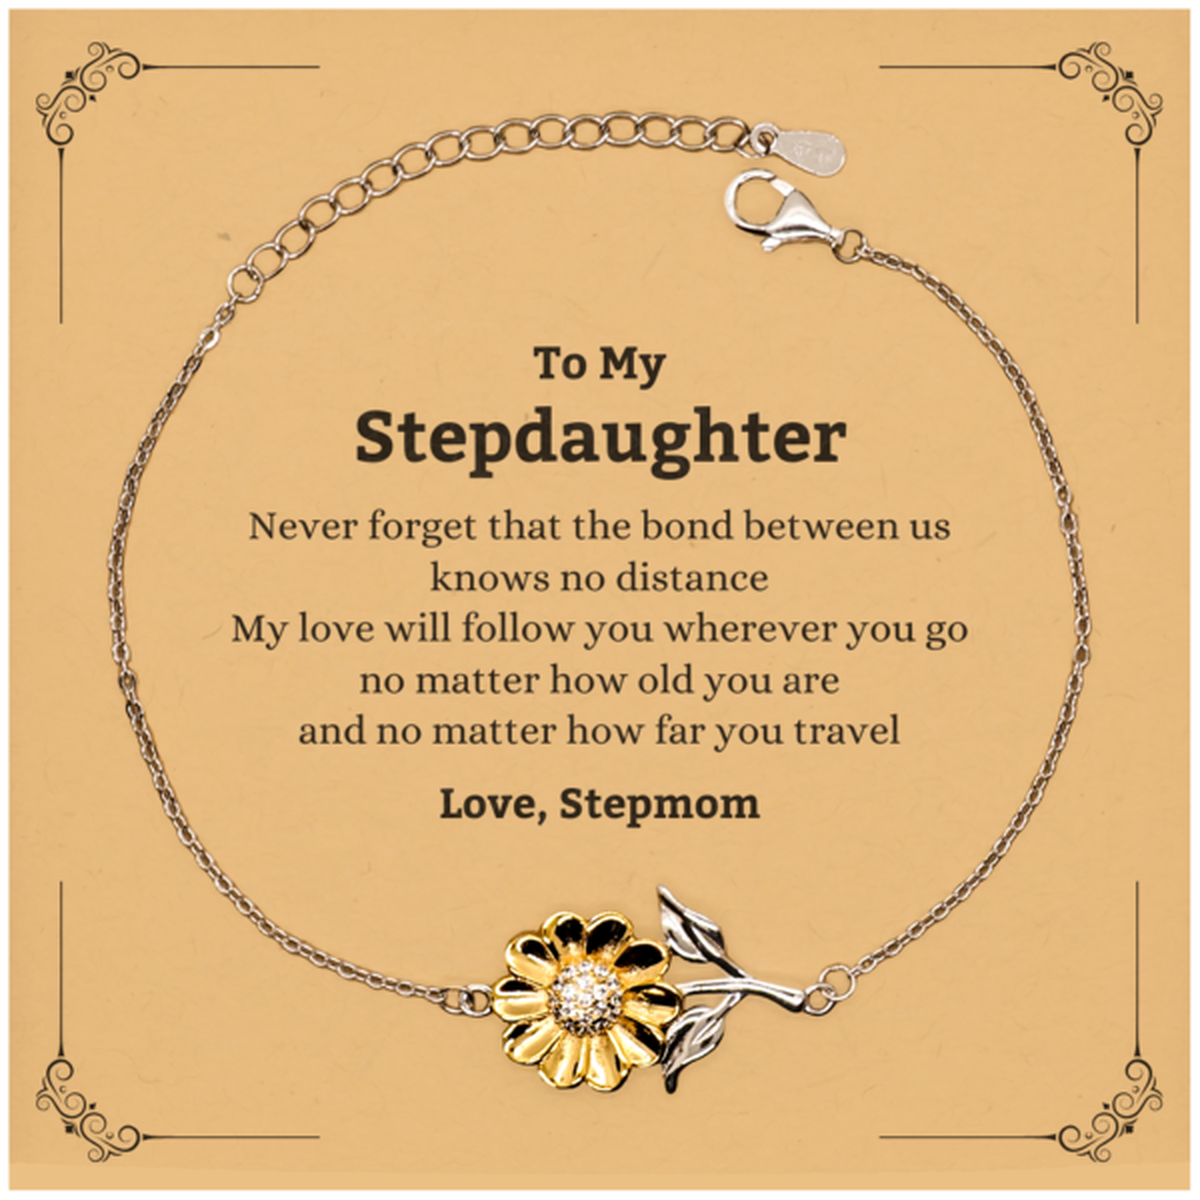 Stepdaughter Birthday Gifts from Stepmom, Adjustable Sunflower Bracelet for Stepdaughter Christmas Graduation Unique Gifts Stepdaughter Never forget that the bond between us knows no distance. Love, Stepmom